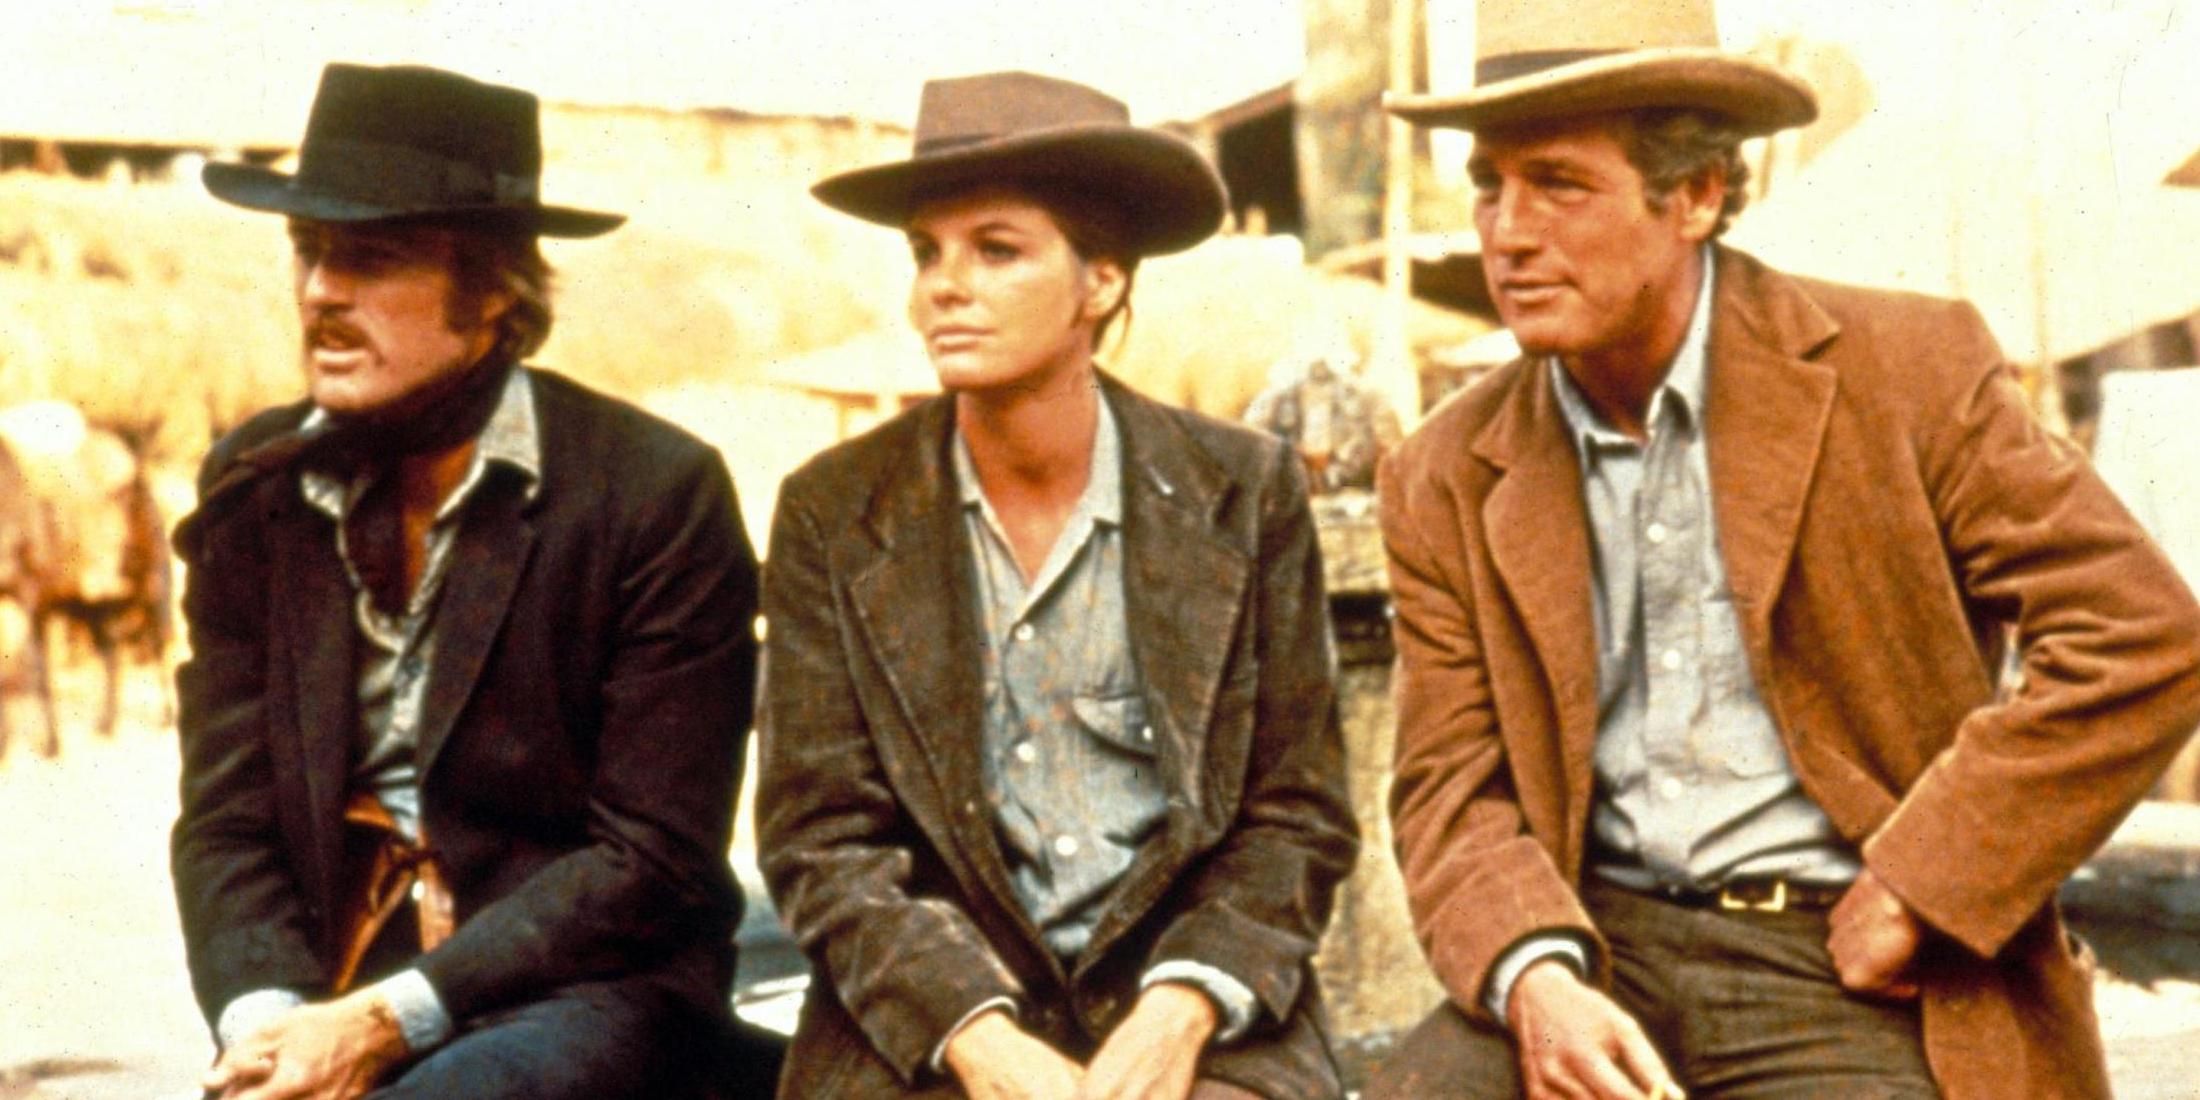 Paul Newman, Robert Redford, and Katharine Ross sitting side by side in Butch Cassidy and the Sundance Kid